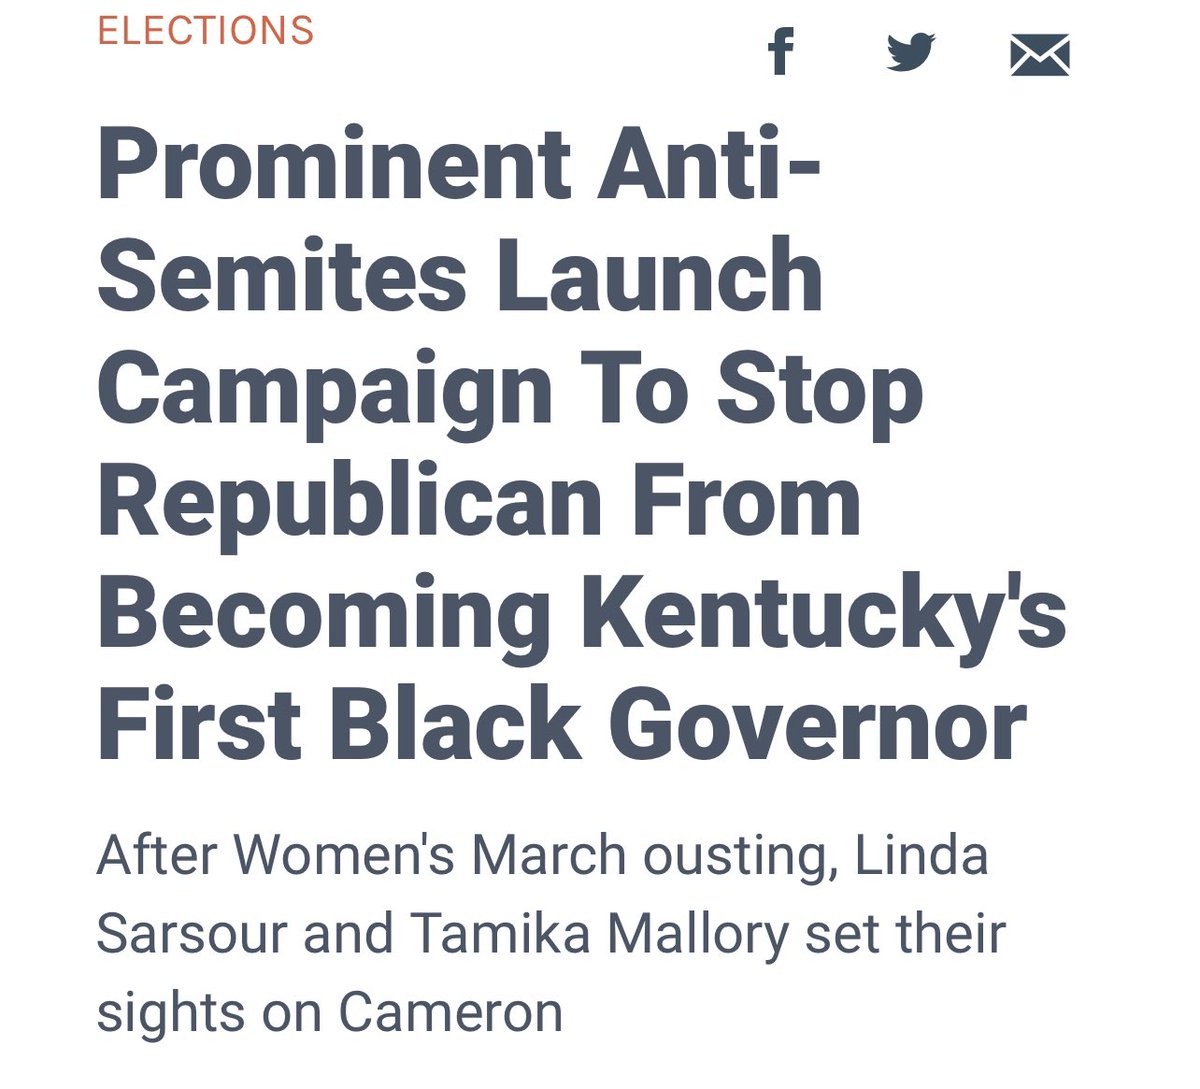 This isn’t the only anti-Semitic behavior @KyDems have exhibited. 

@atticascottky as state rep chanted “from the river to the sea, Palestine shall be free” - a call for the destruction of Israel.

And internationally known anti-semites are now running a pro-@AndyBeshearKY group.